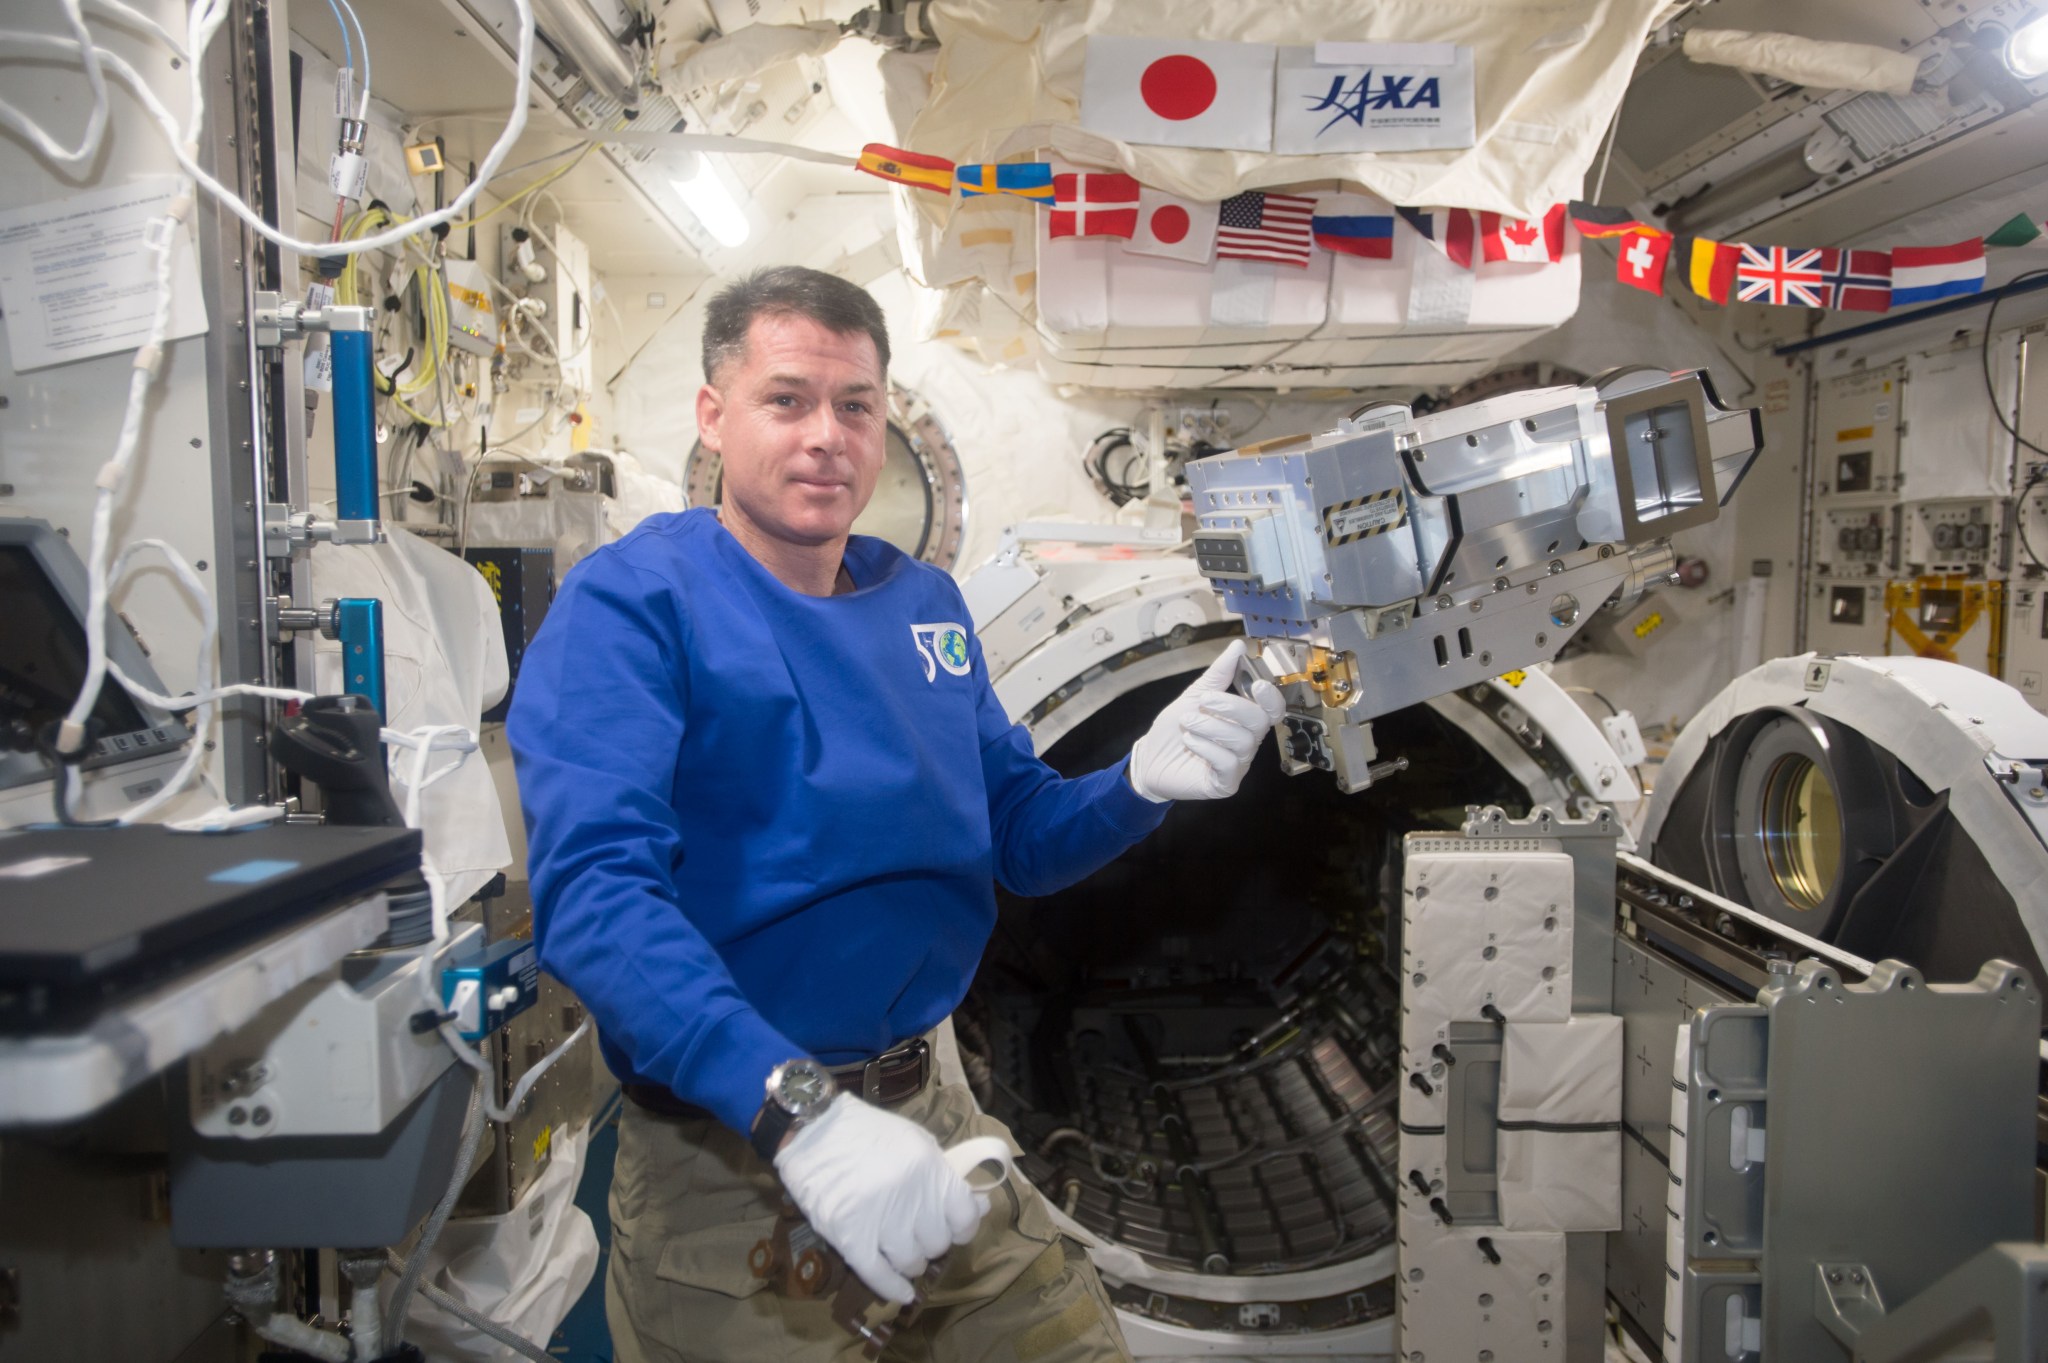 Shane Kimbrough and leak locator on the Space Station. He is wearing a blue shirt and white gloves and gesturing to the leak locator, which is floating in microgravity.